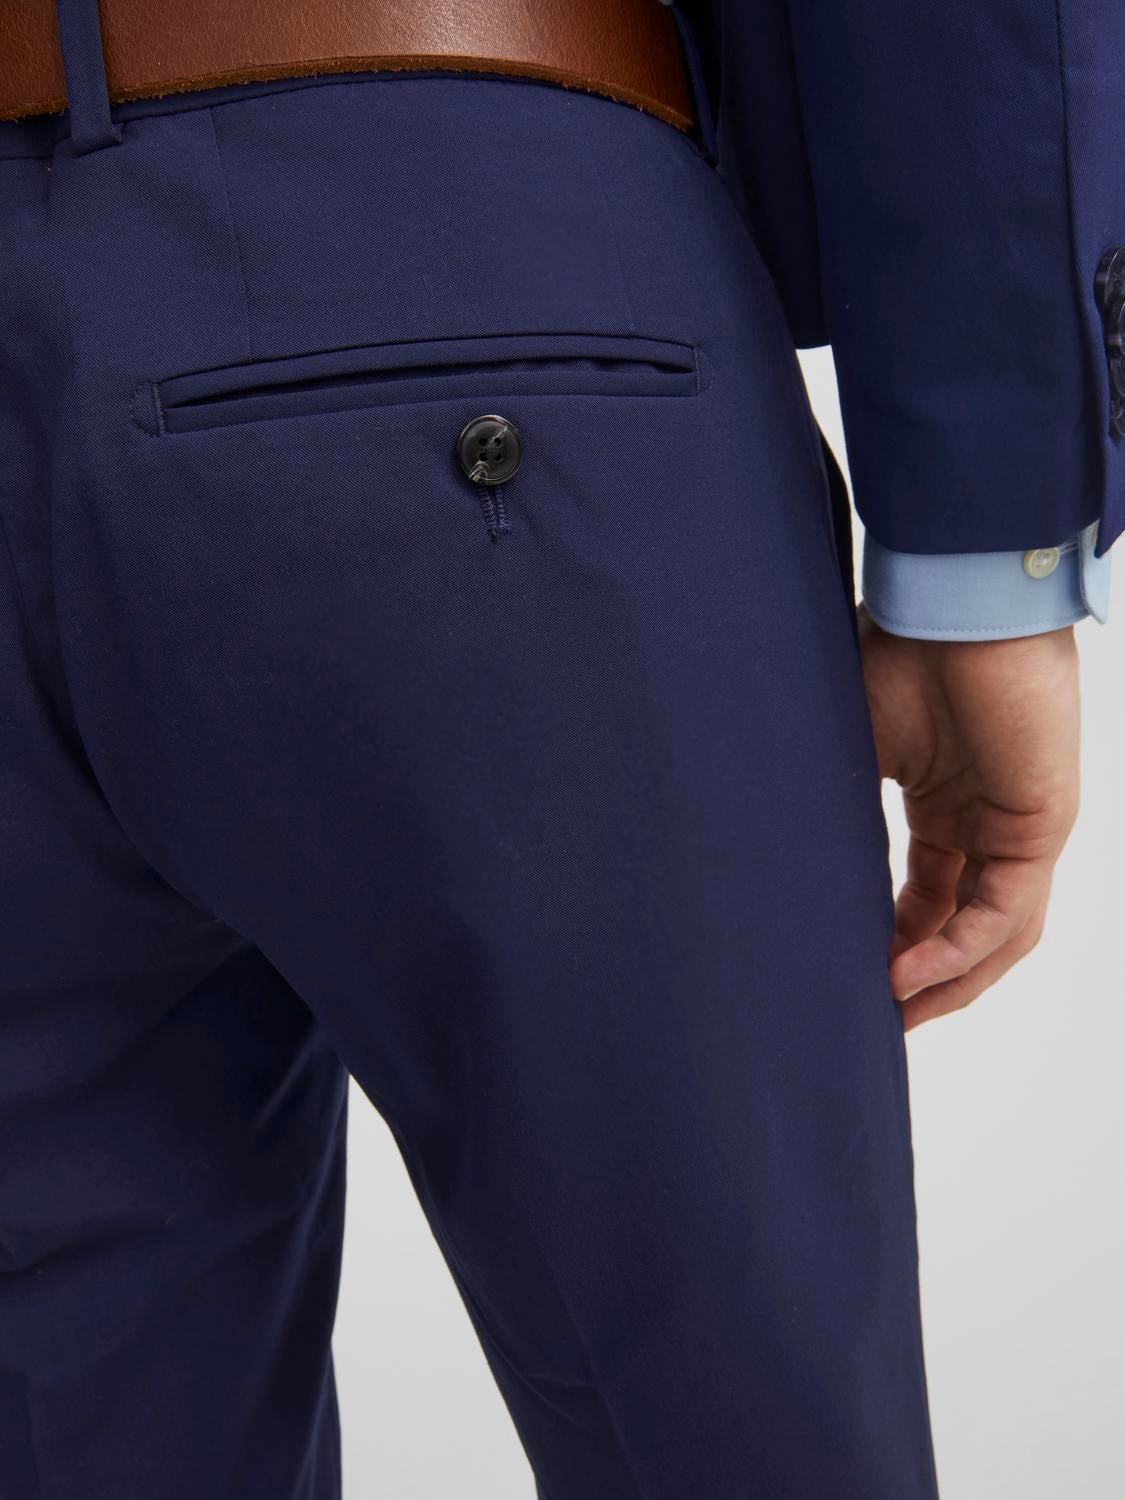 Lands' End Plain Front Tailored Fit Original Chino Pants, $49 | Lands' End  | Lookastic